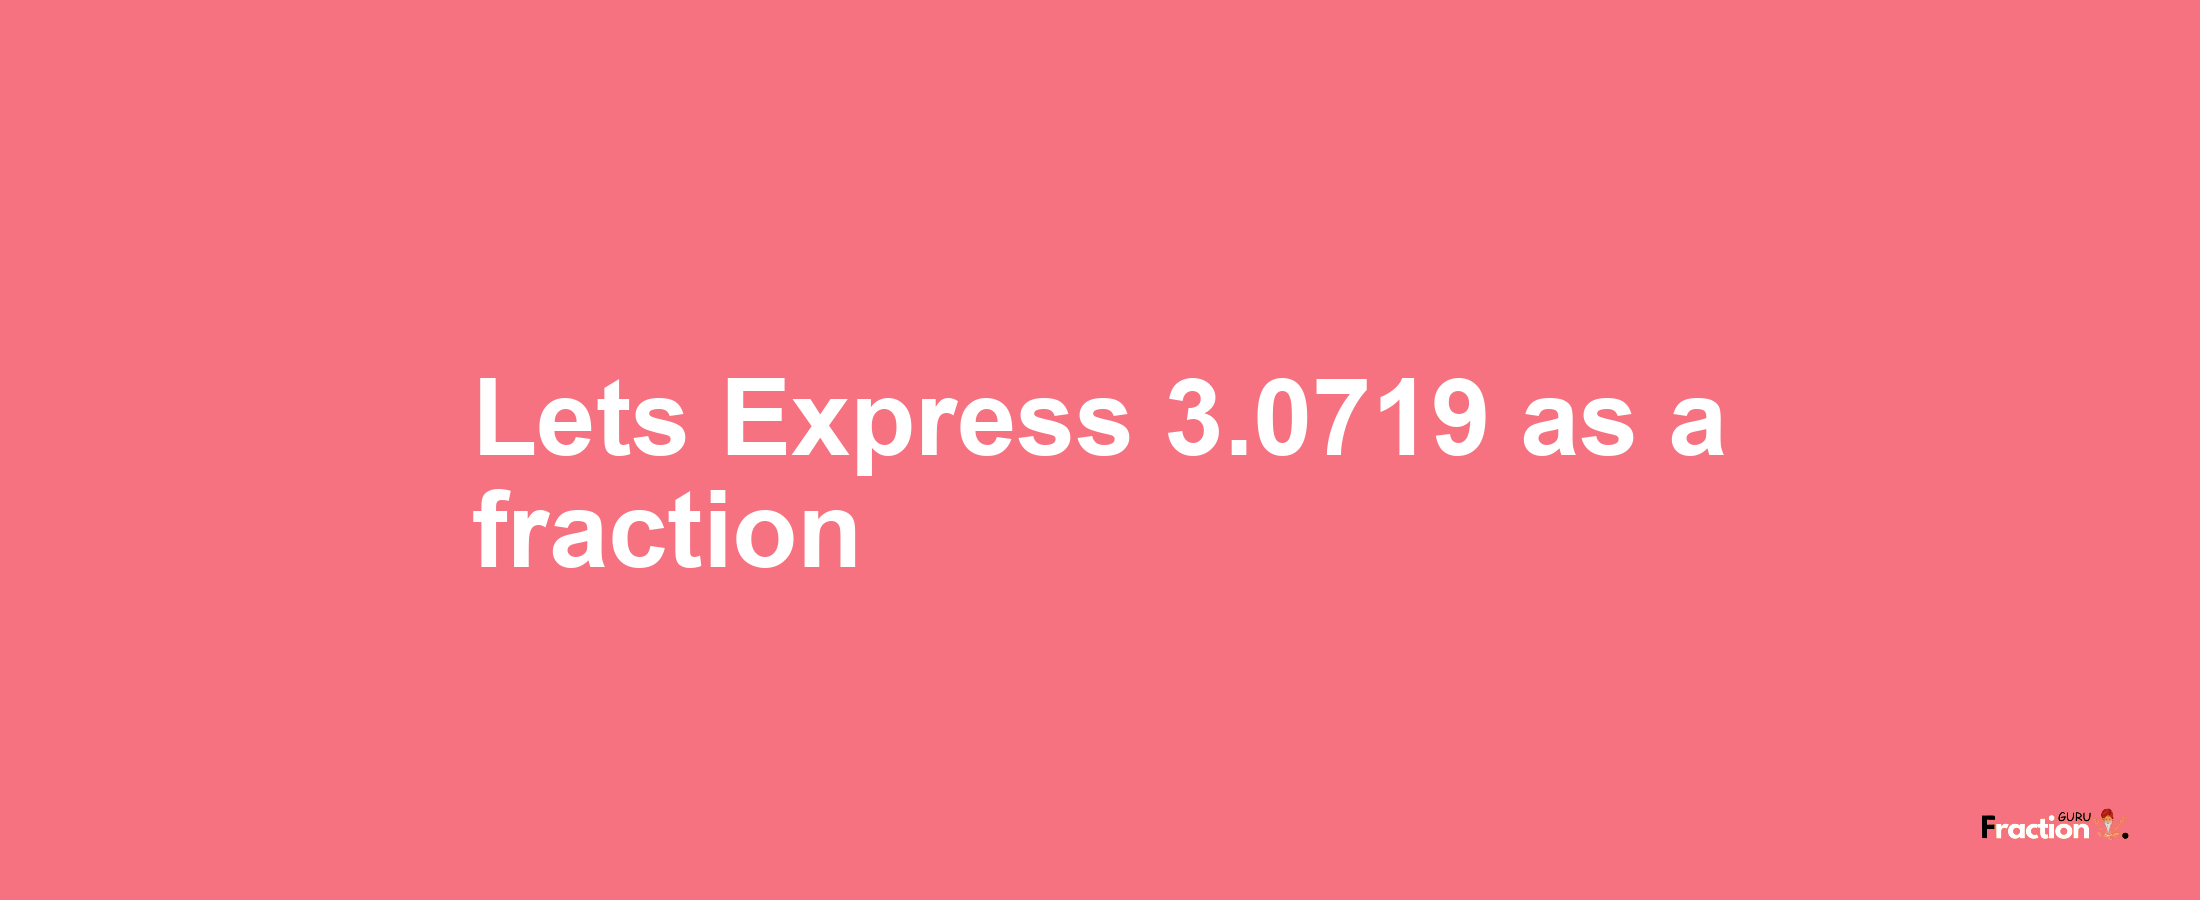 Lets Express 3.0719 as afraction